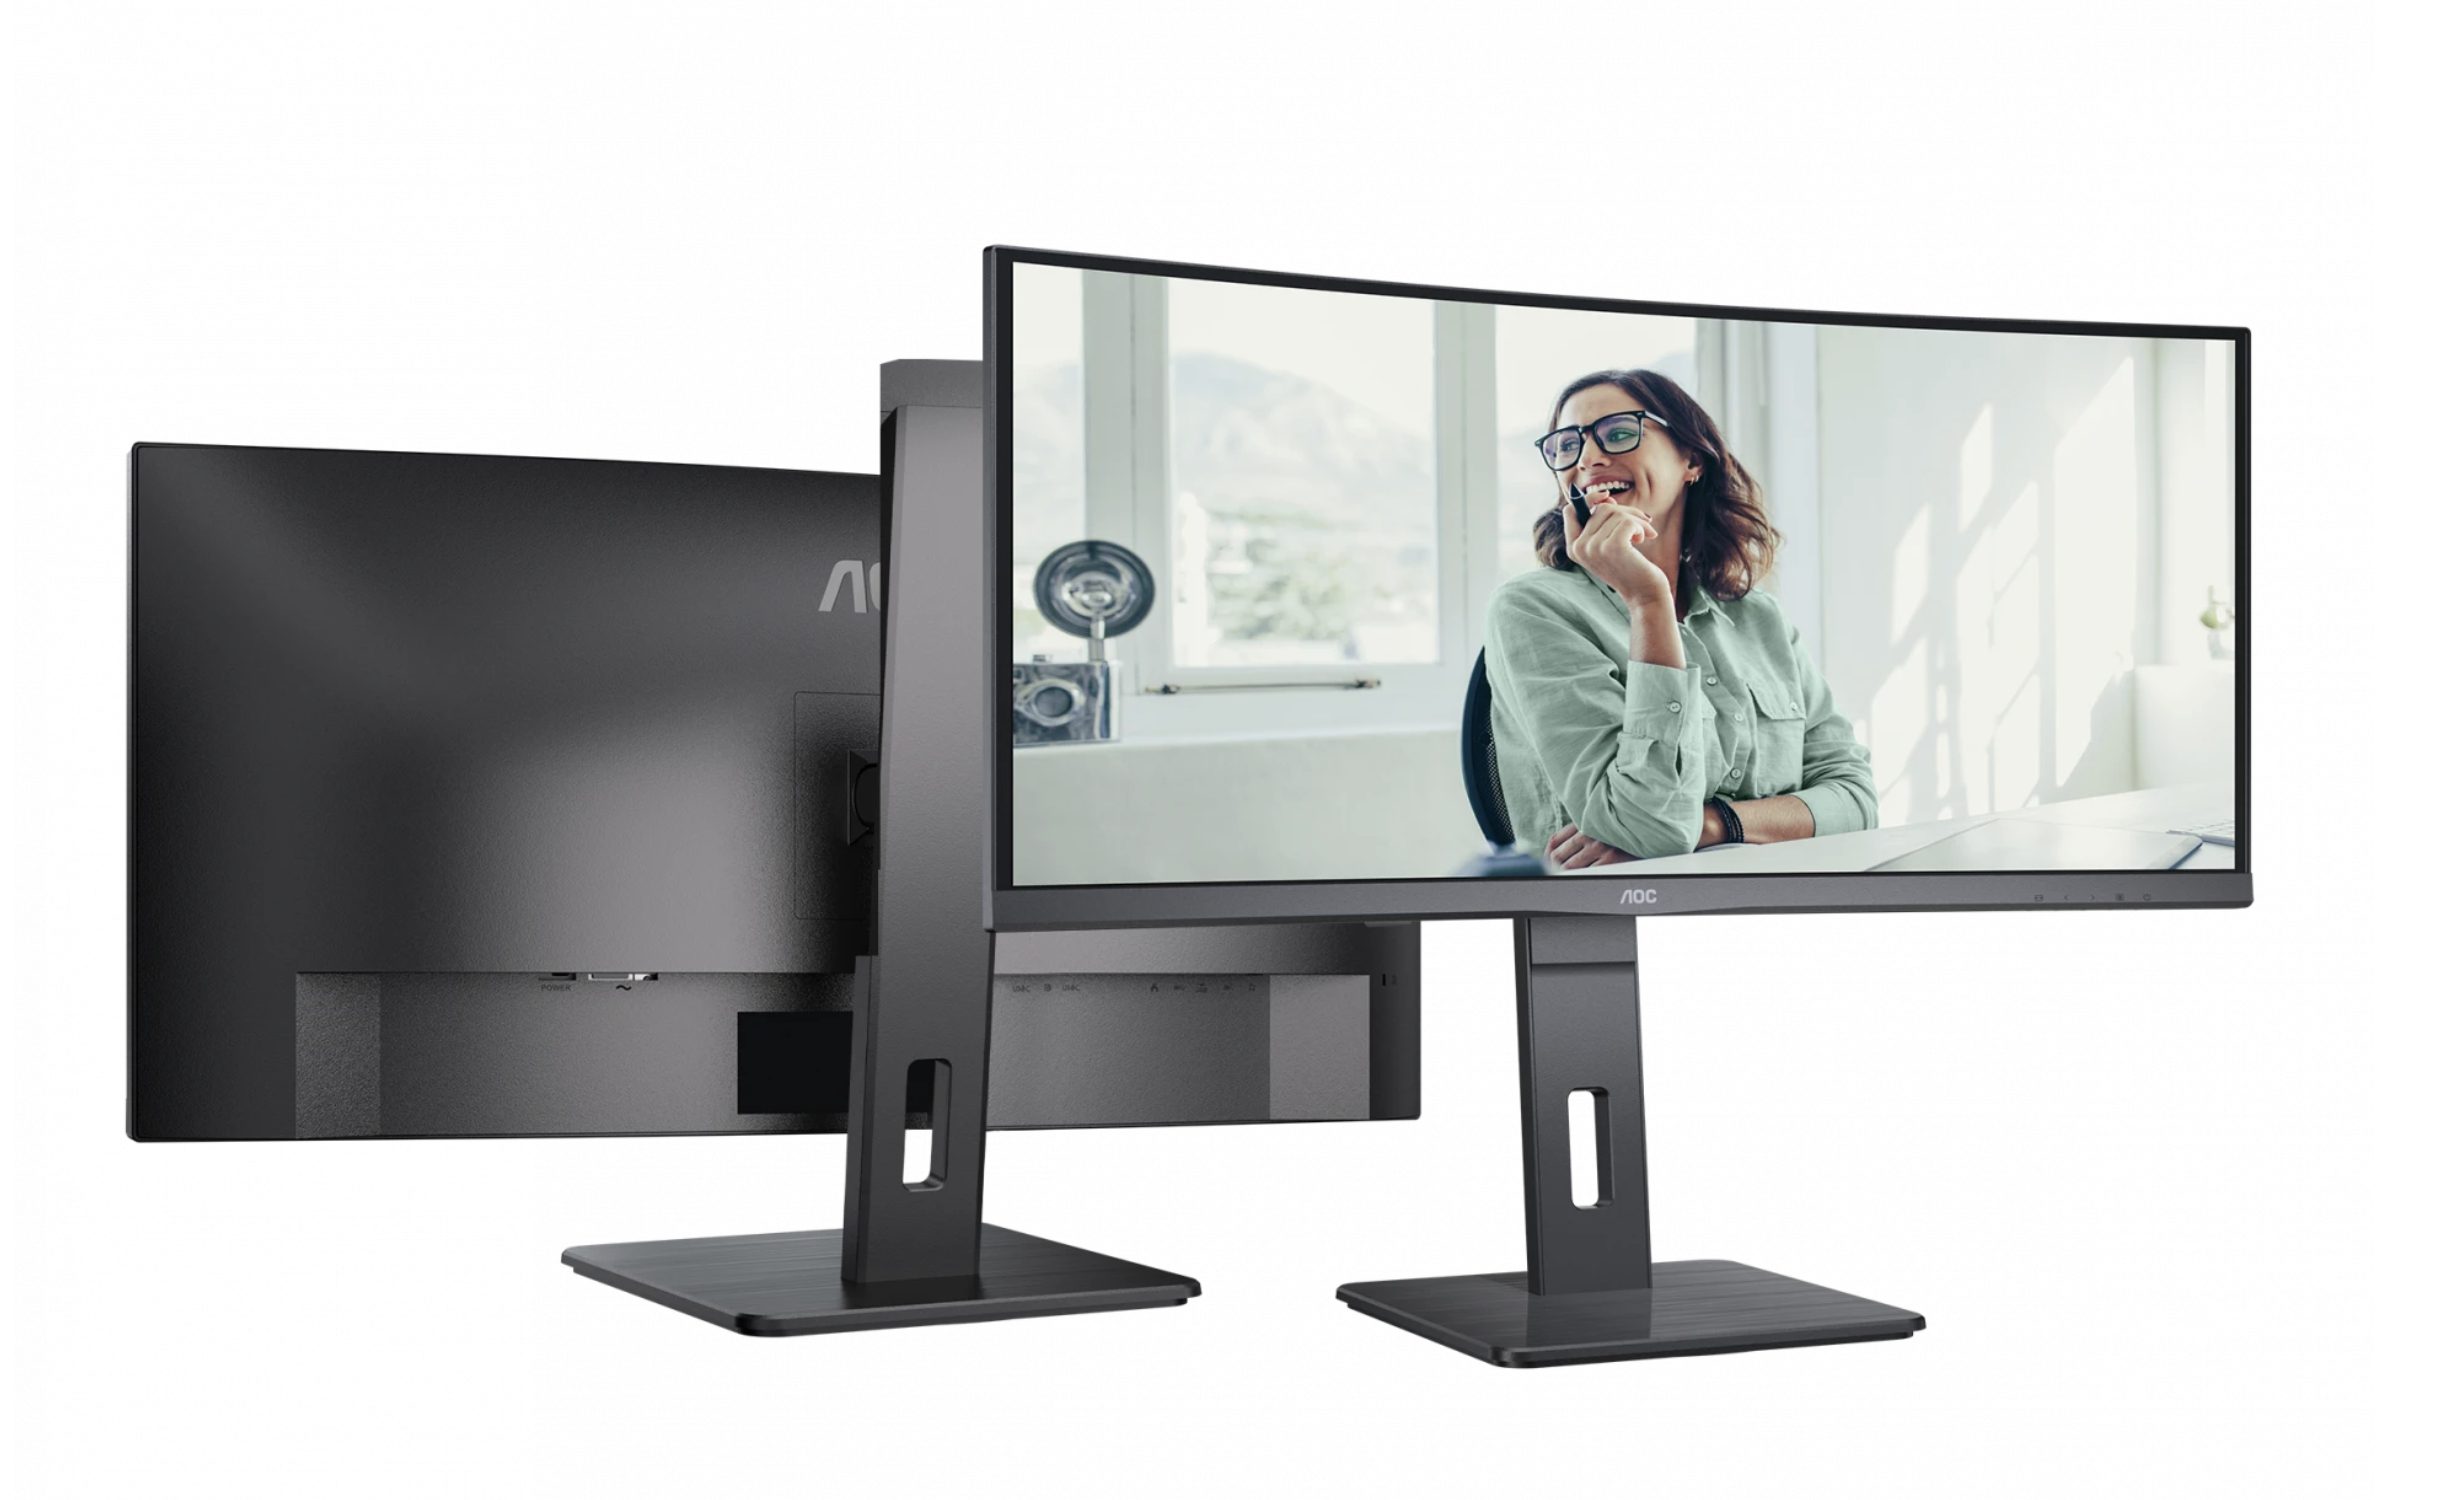 AOC announced new P3 displays with a focus on USB-C and webcams